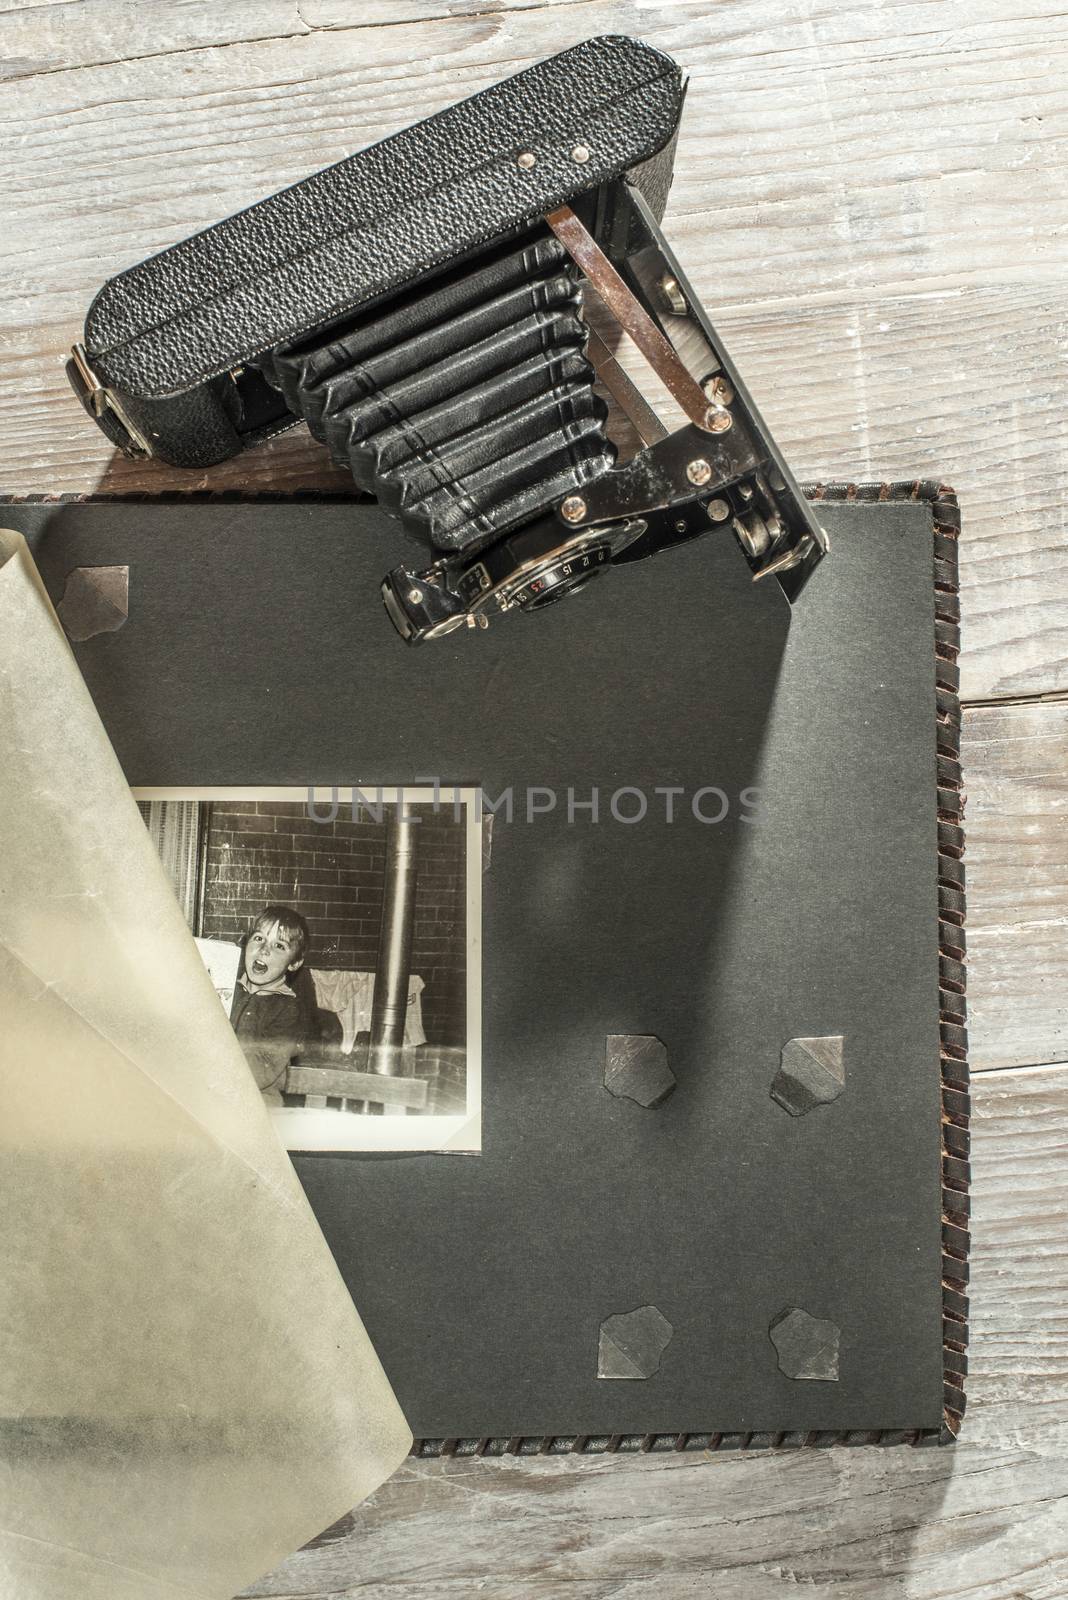 Vintage photo camera and album on white wooden background